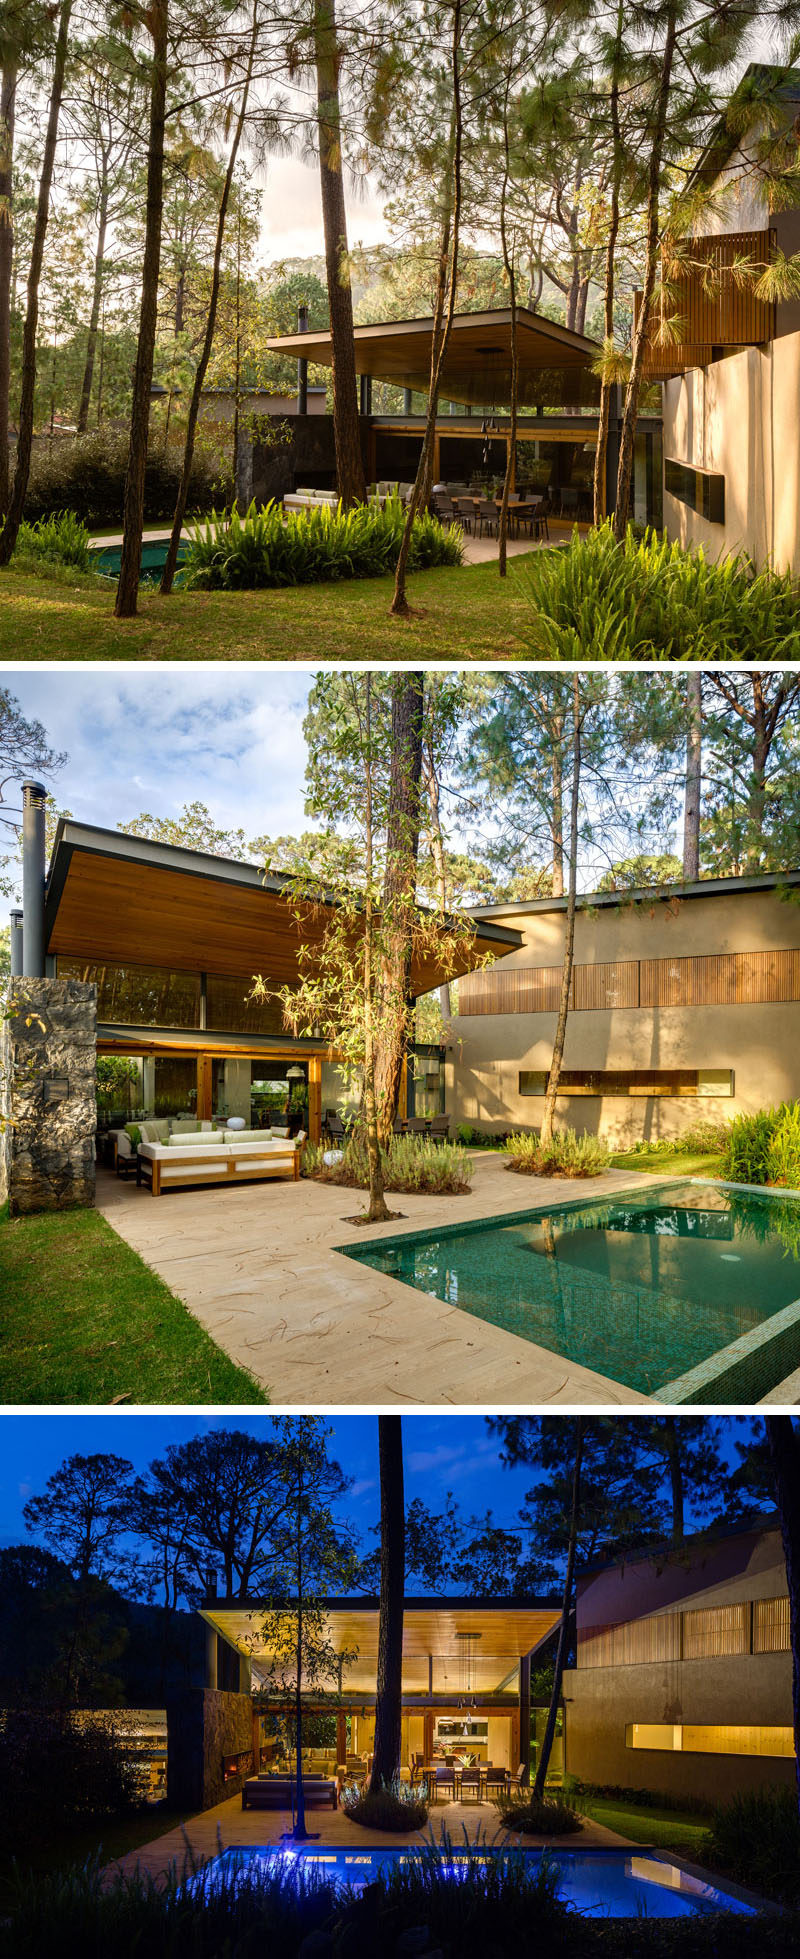 The design and layout of this home creates a sense of privacy, with the adult trees providing shade for the swimming pool and covered patio.